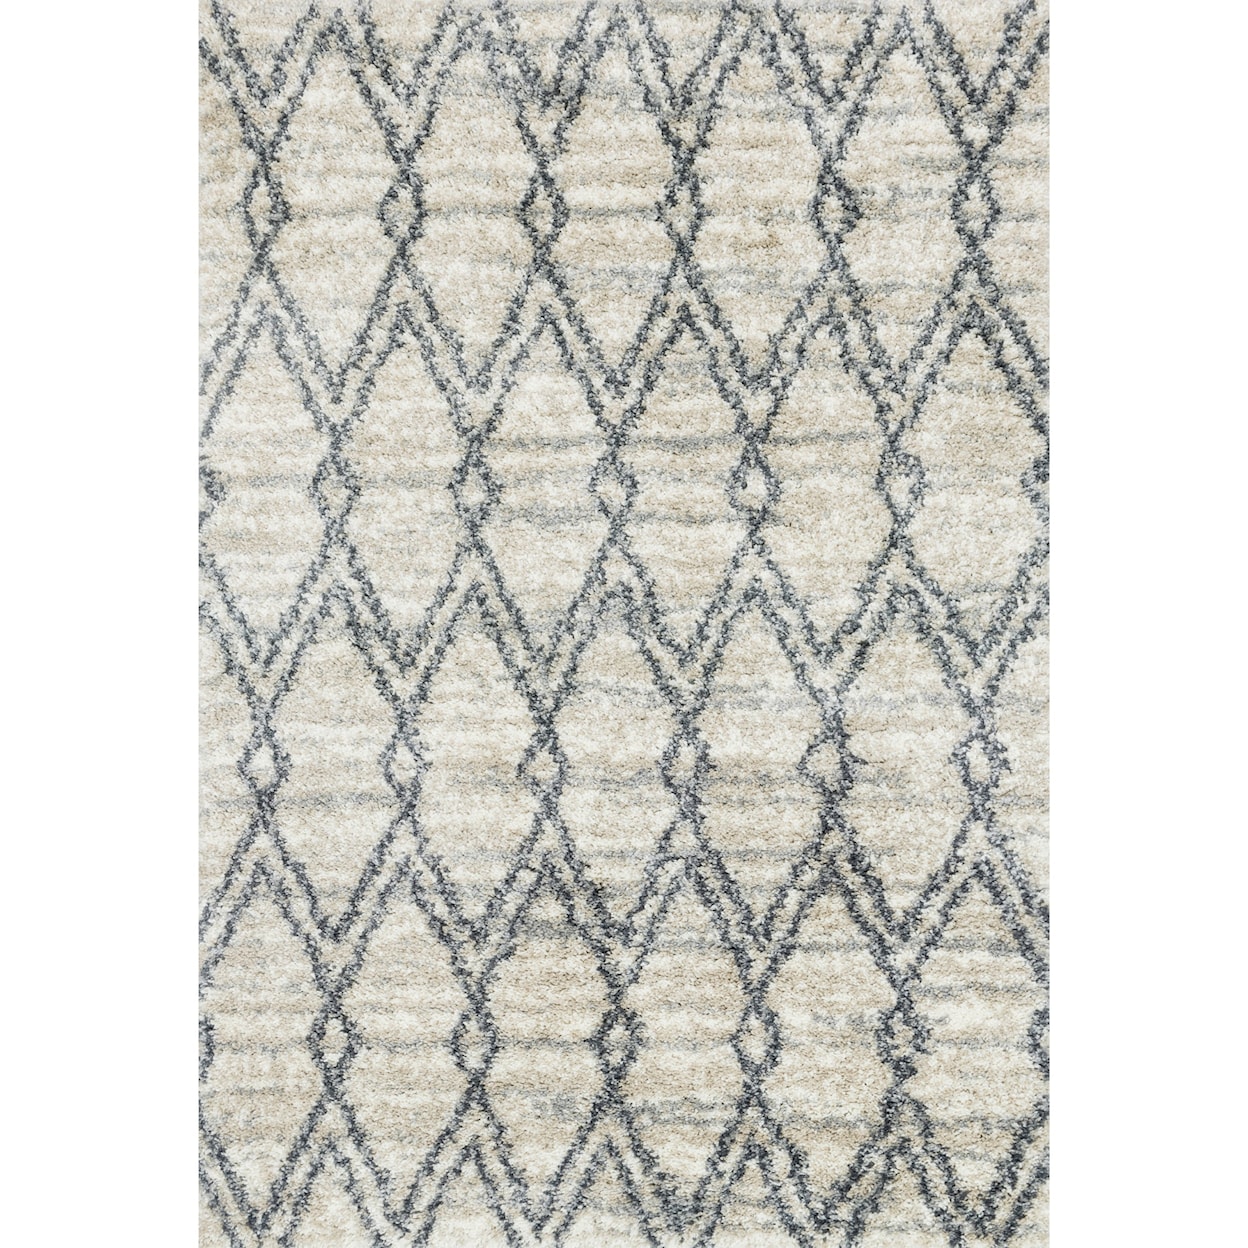 Reeds Rugs Quincy 1'6" x 1'6"  Sand / Graphite Rug